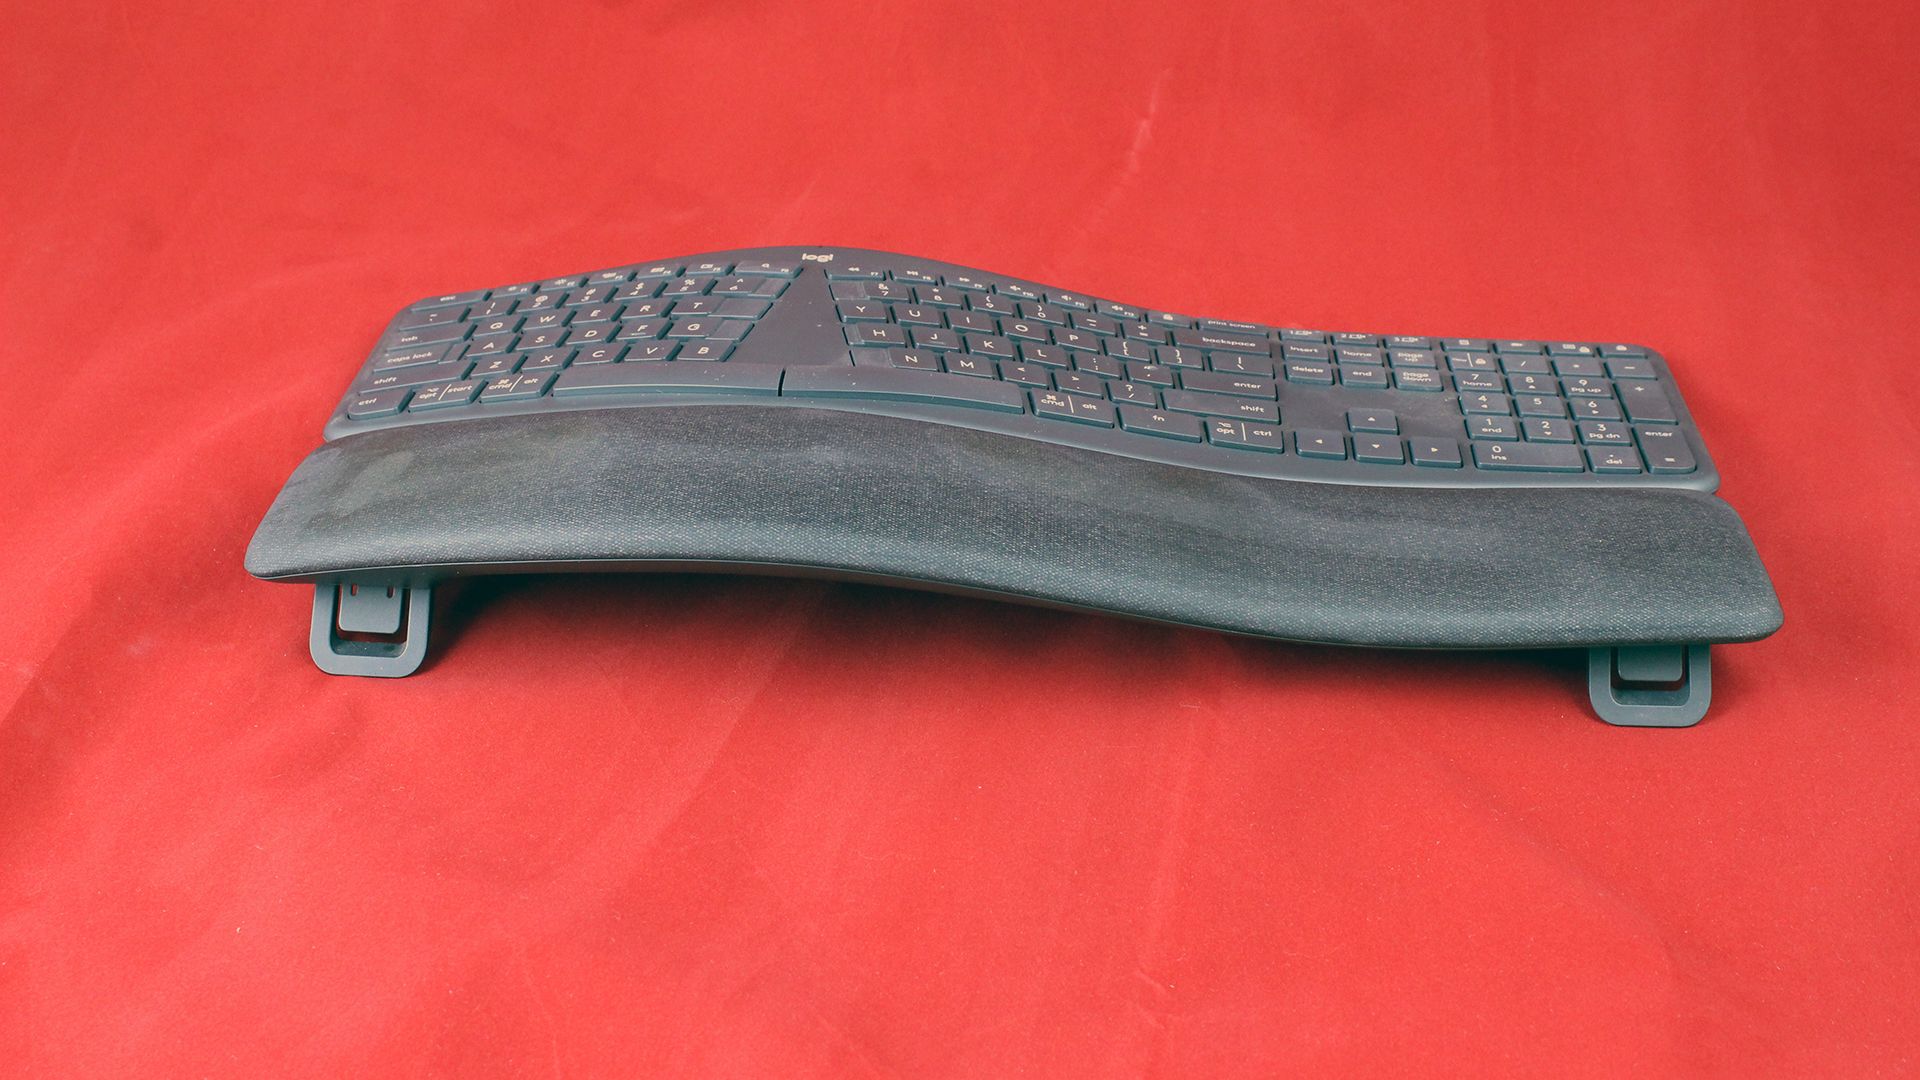 A front view of the ERGO K860, showing its gentle curve.